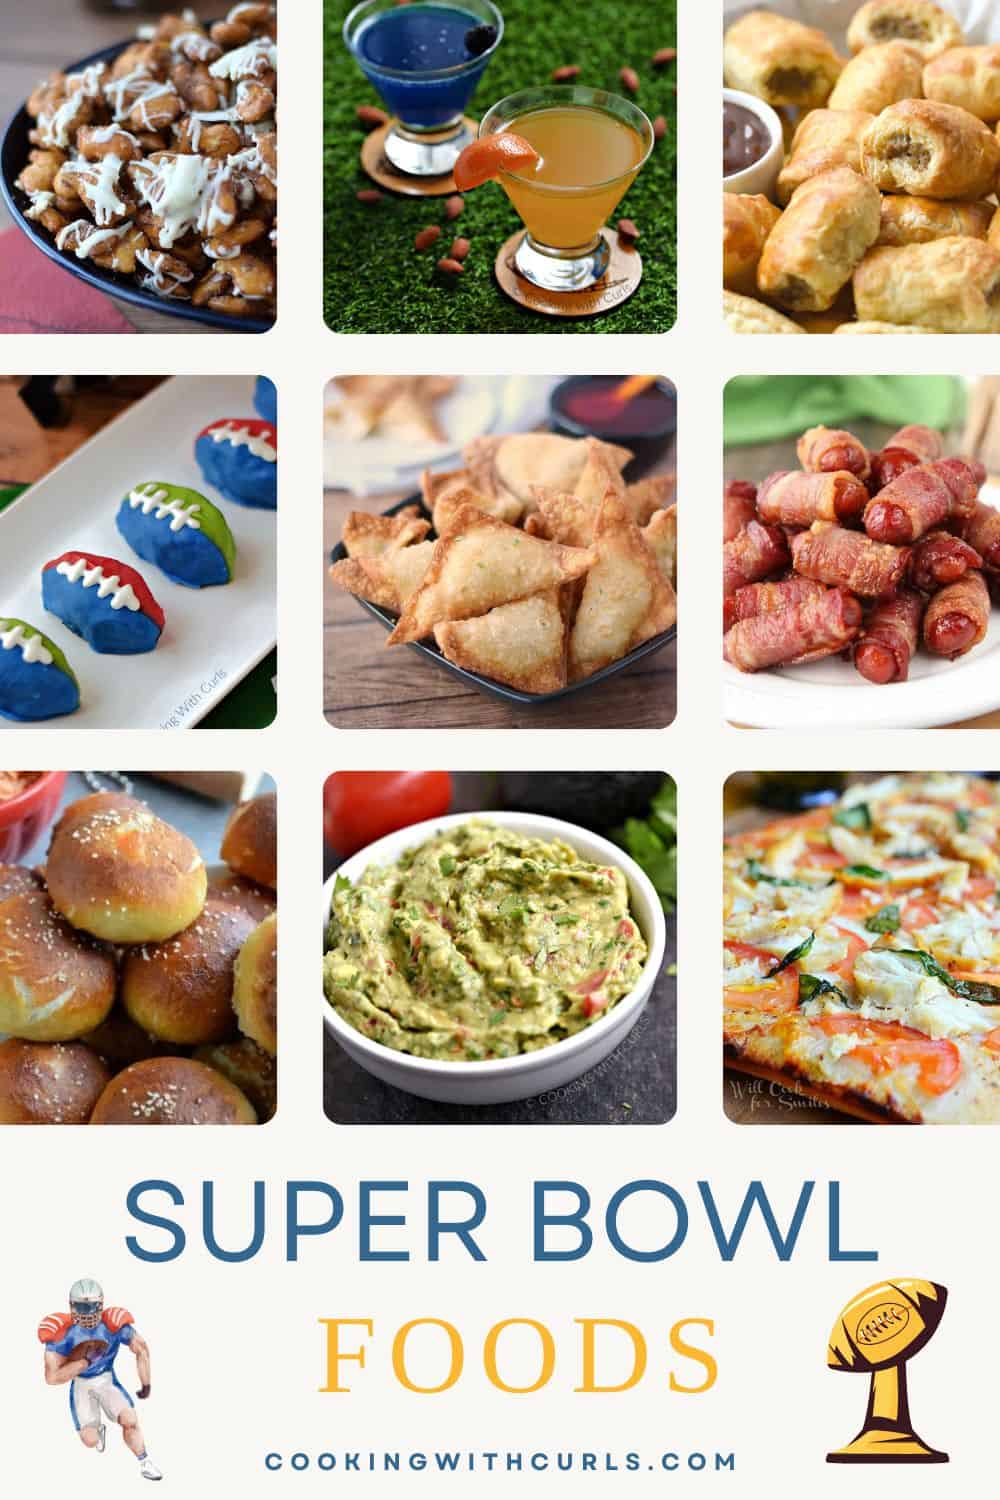 Super Bowl Foods collage with nine images of game day foods and title graphic across the bottom.